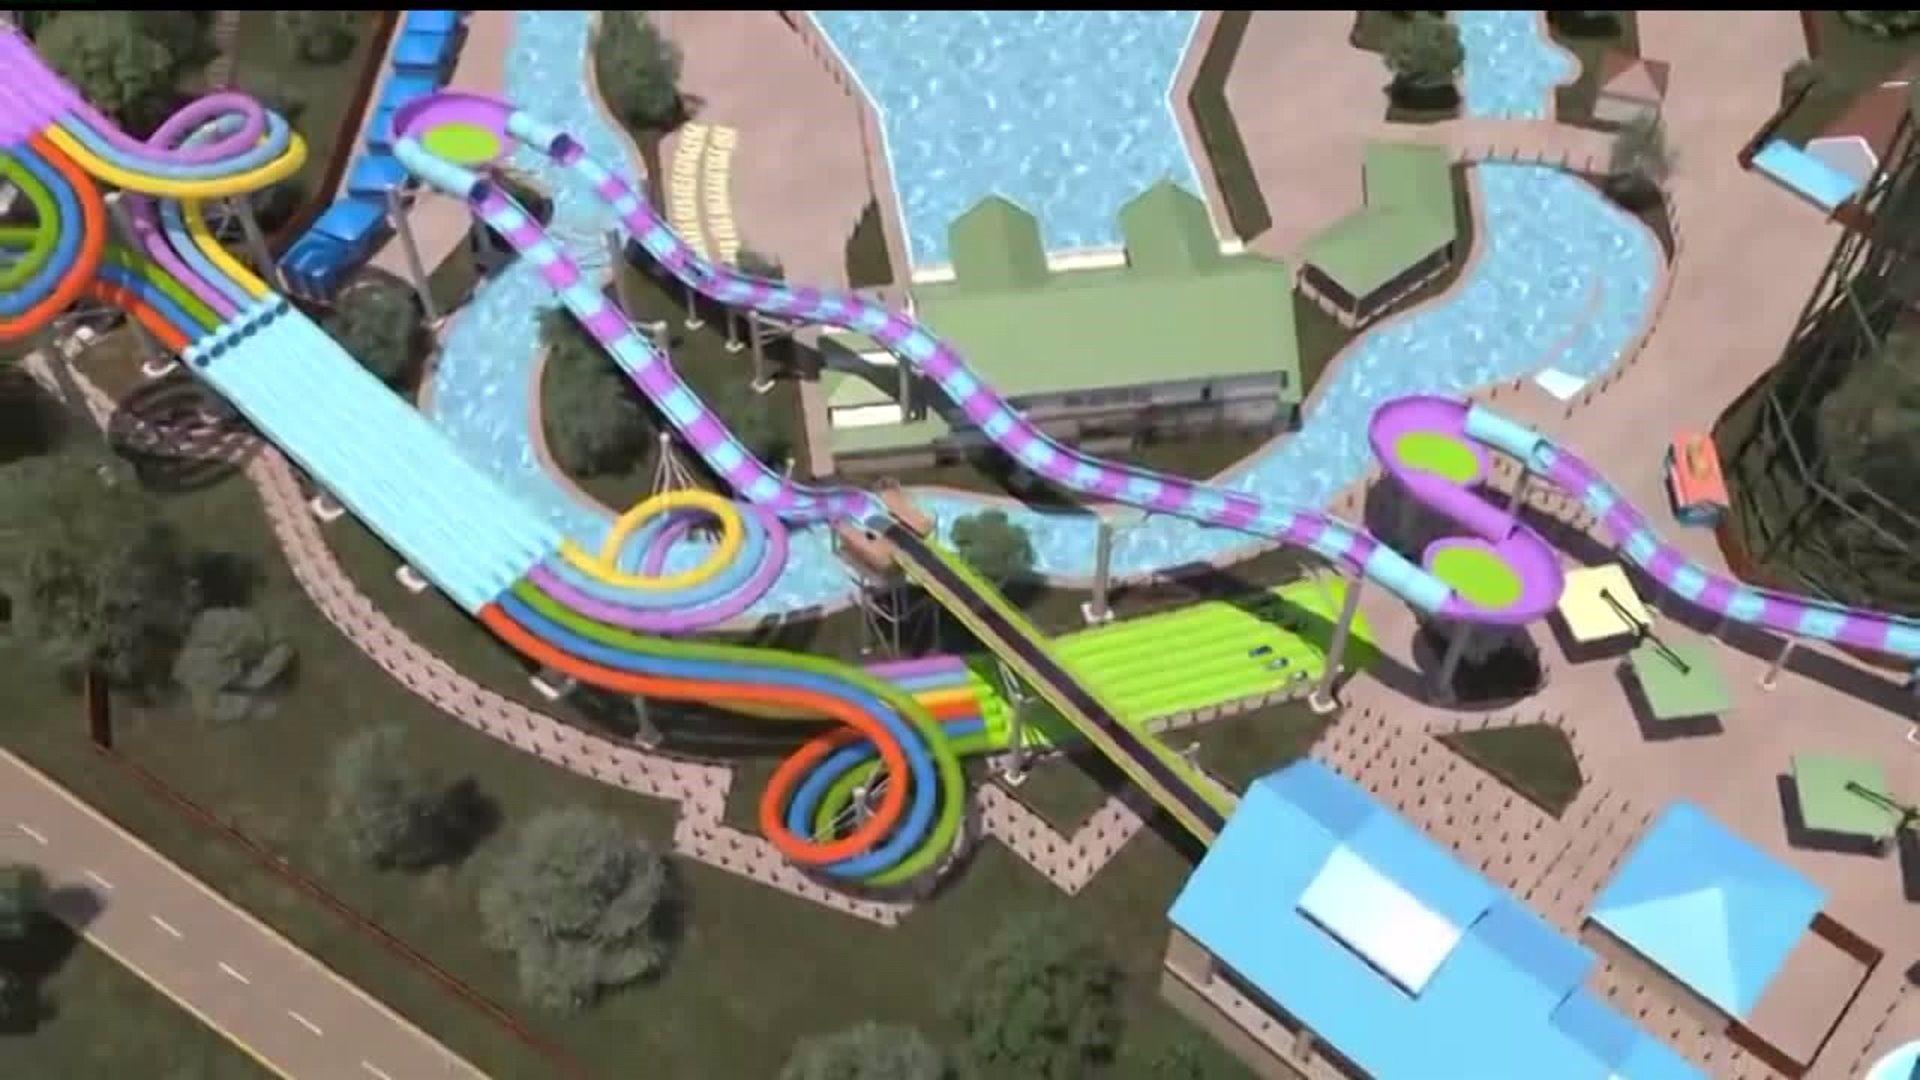 Hersheypark announces it will add two new water rides to its Boardwalk water park for 2018